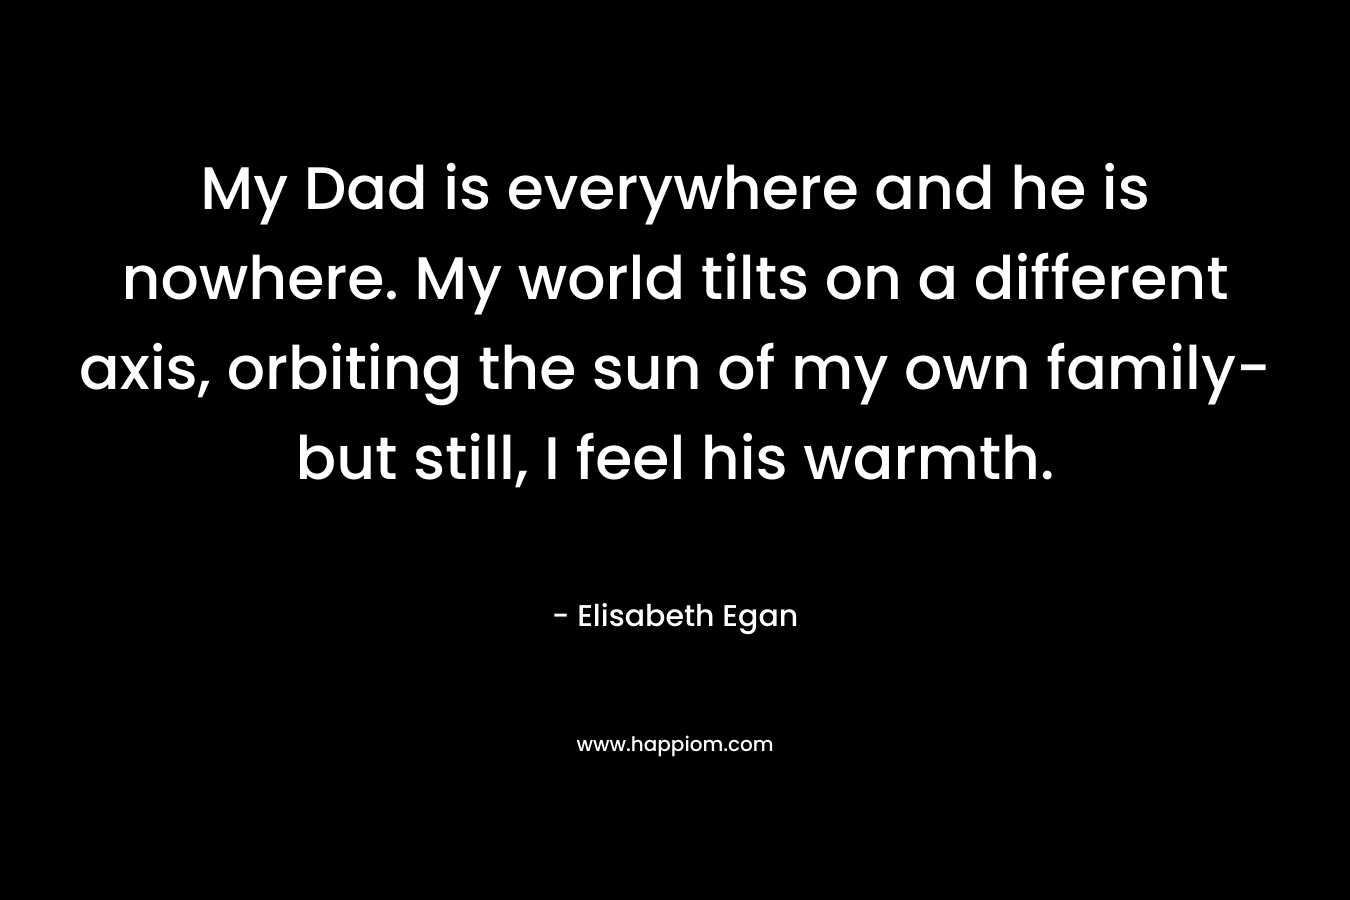 My Dad is everywhere and he is nowhere. My world tilts on a different axis, orbiting the sun of my own family- but still, I feel his warmth.